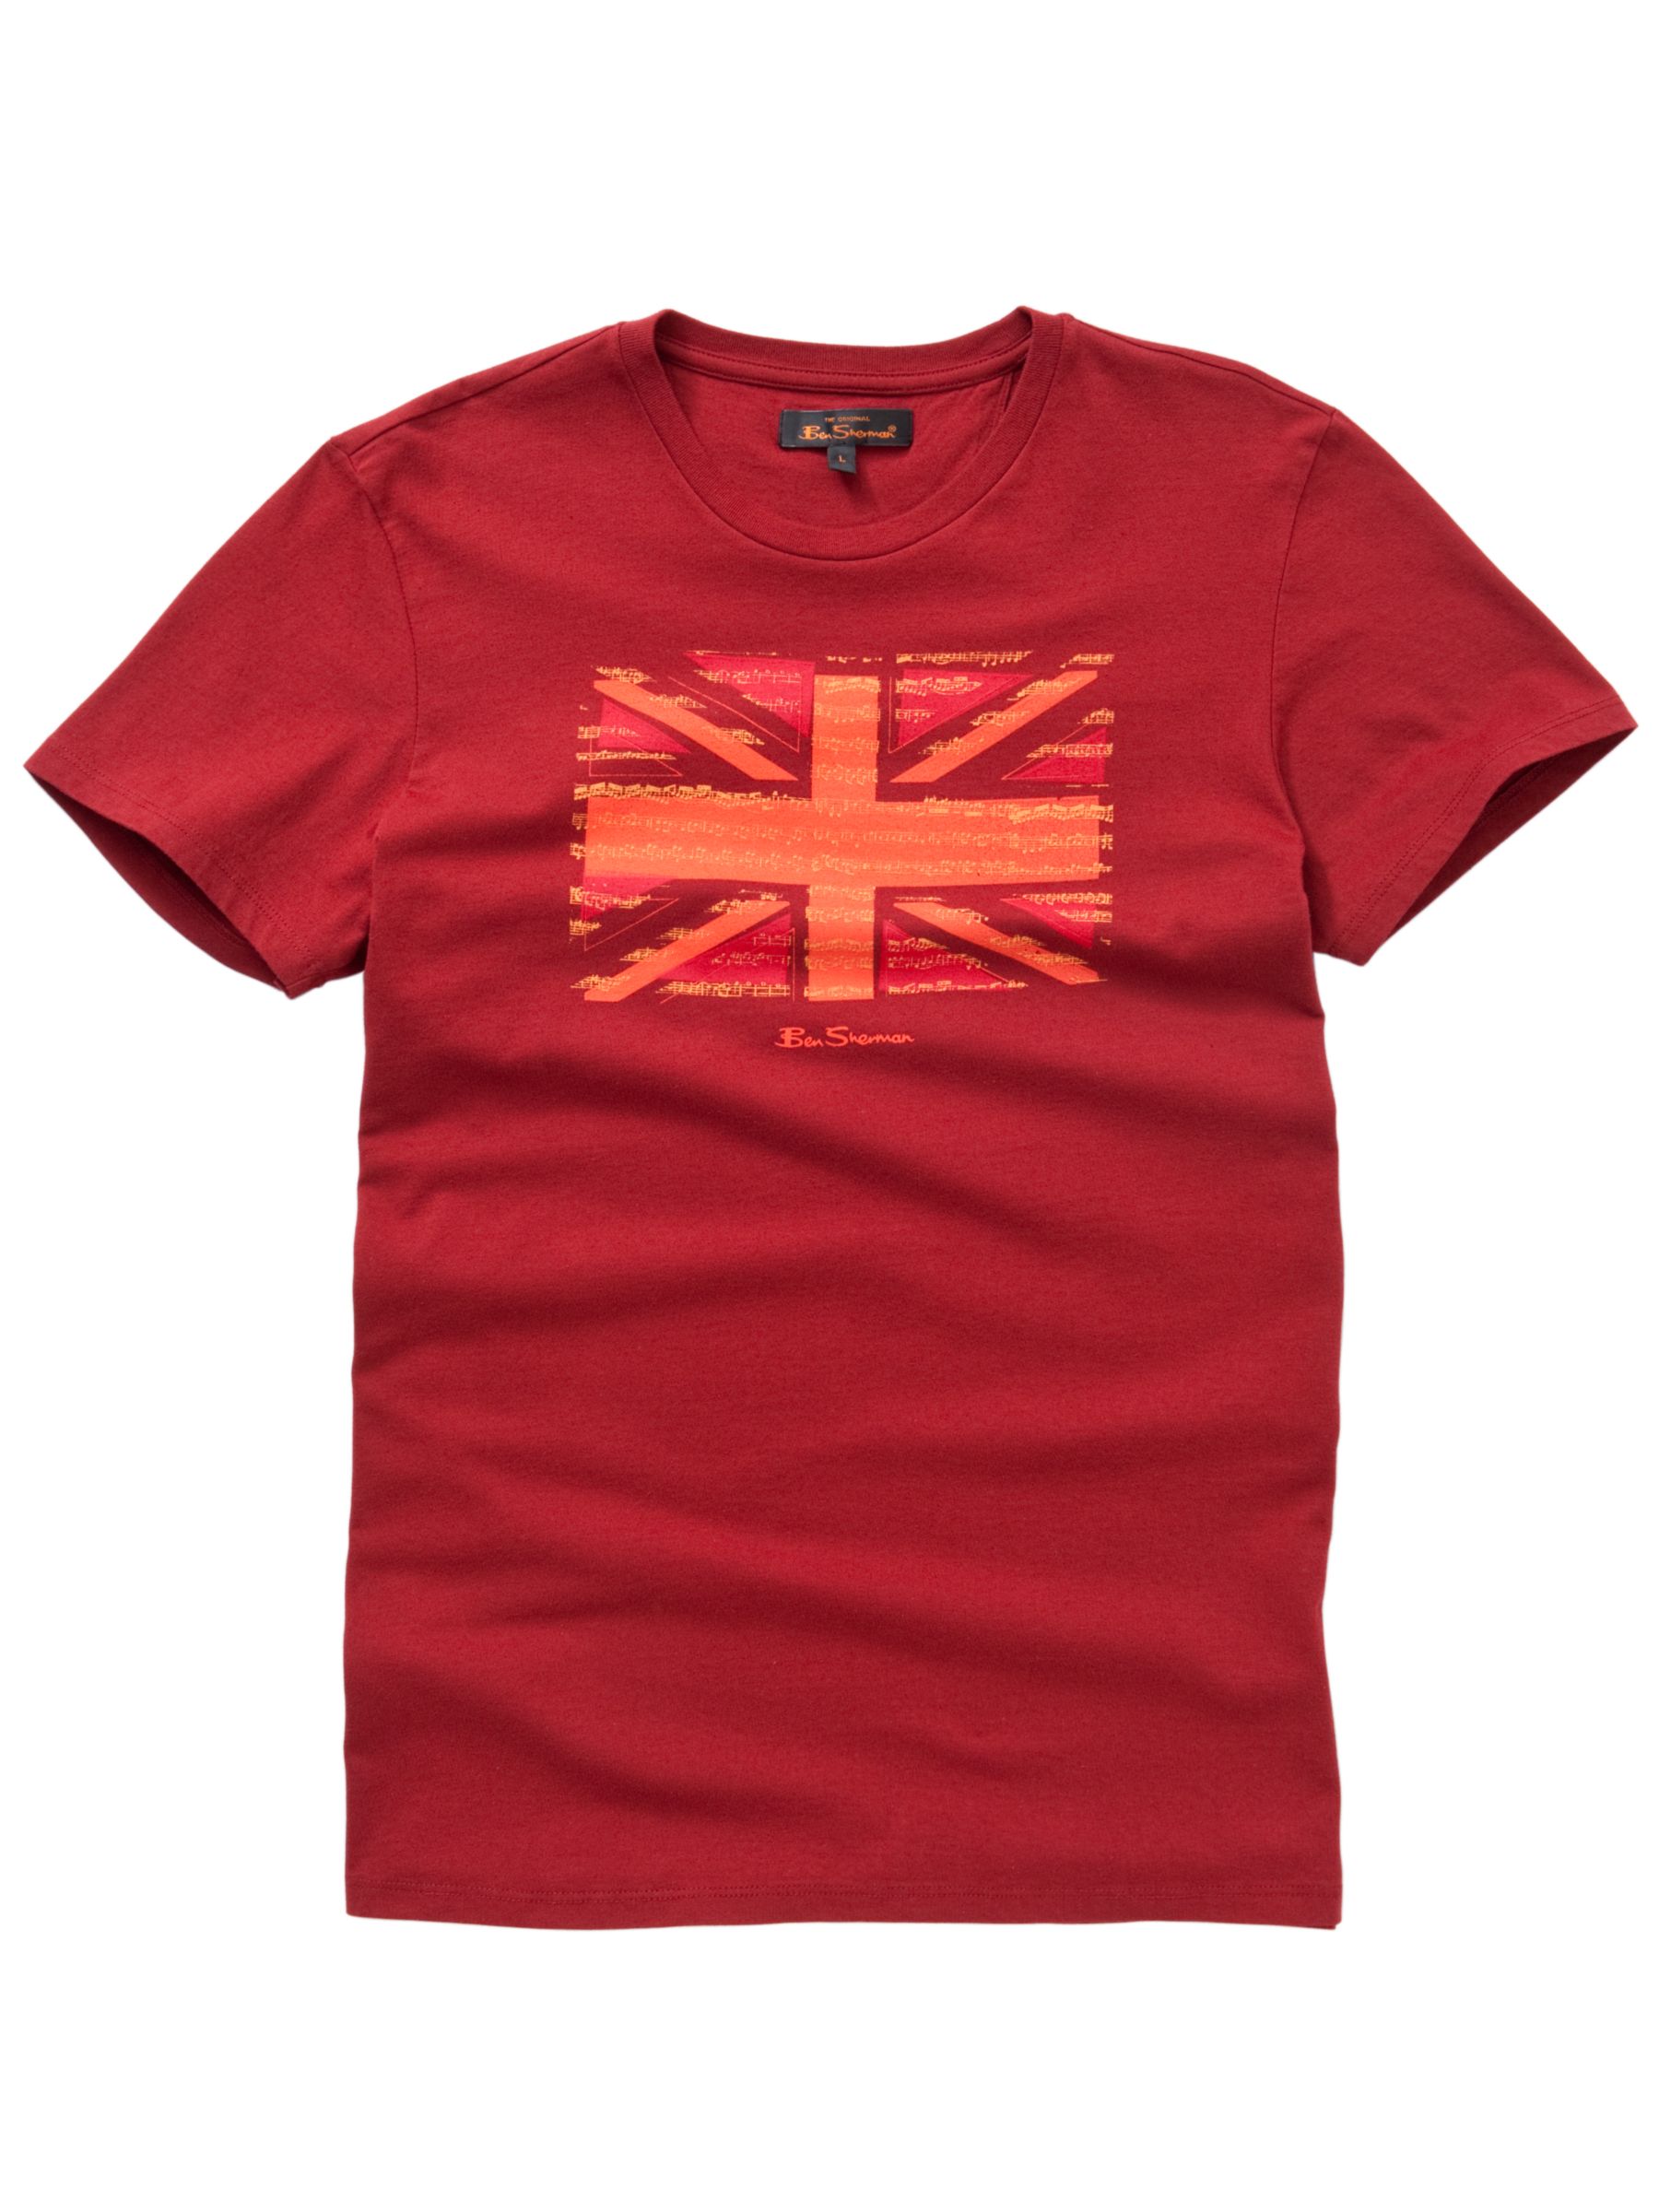 Union Jack T-Shirt, Red